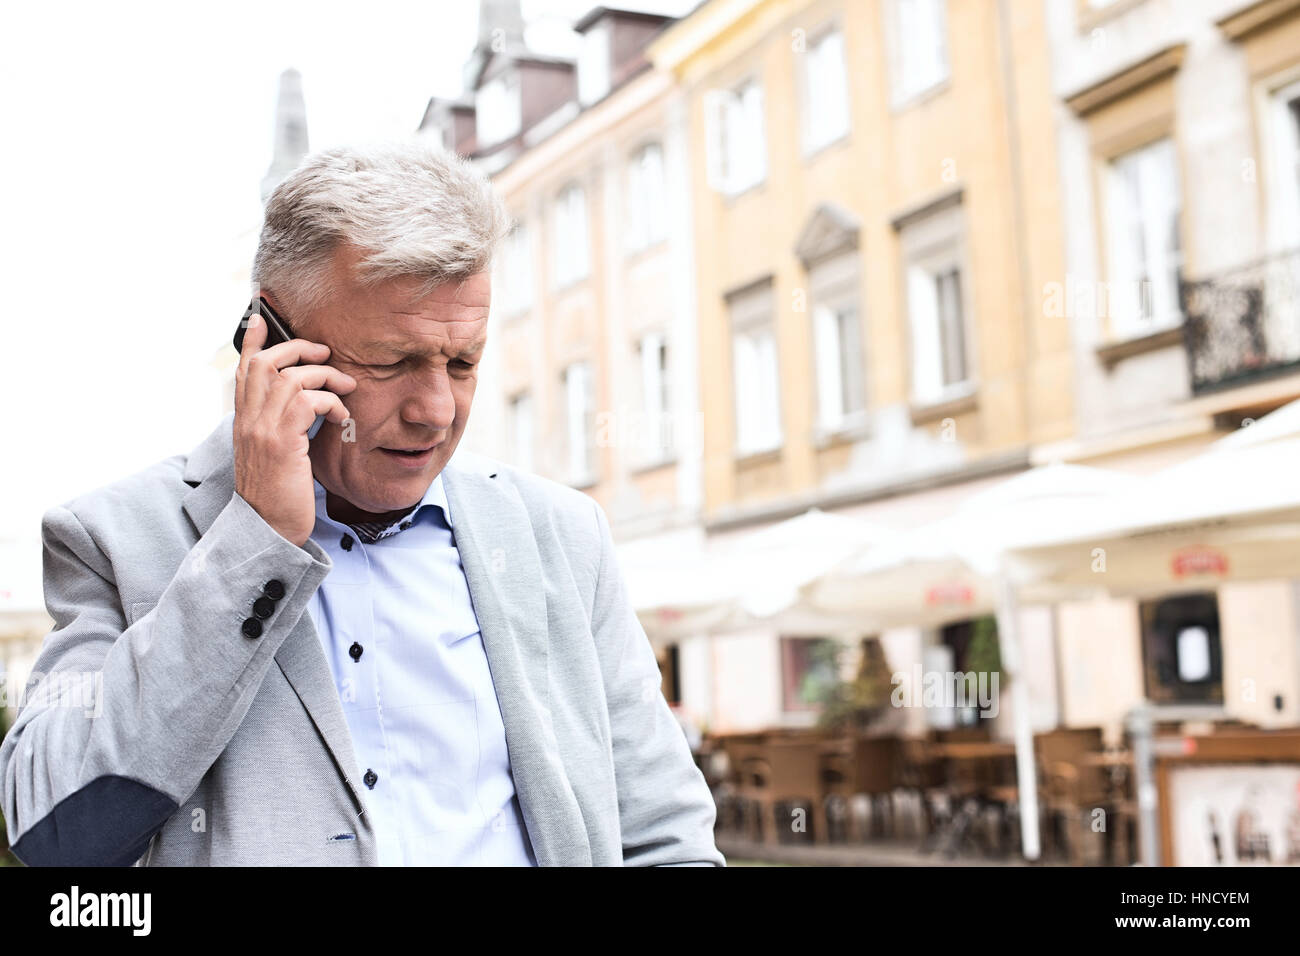 Middle-aged man using mobile phone in city Stock Photo